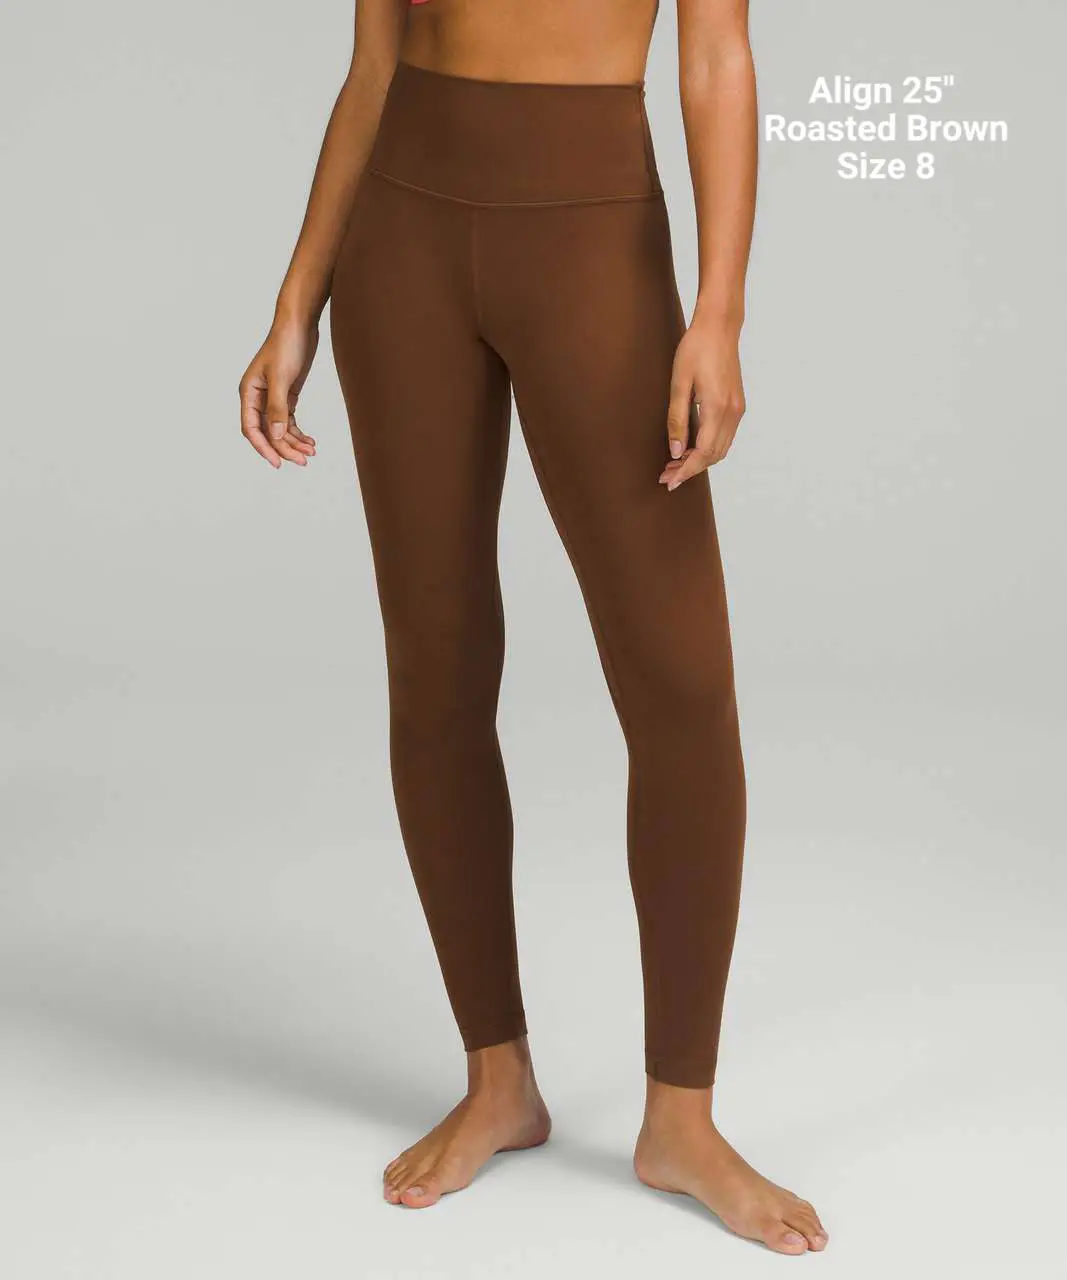 Late to the Roasted Brown train. Ribbed Nulu High Neck Yoga Bra